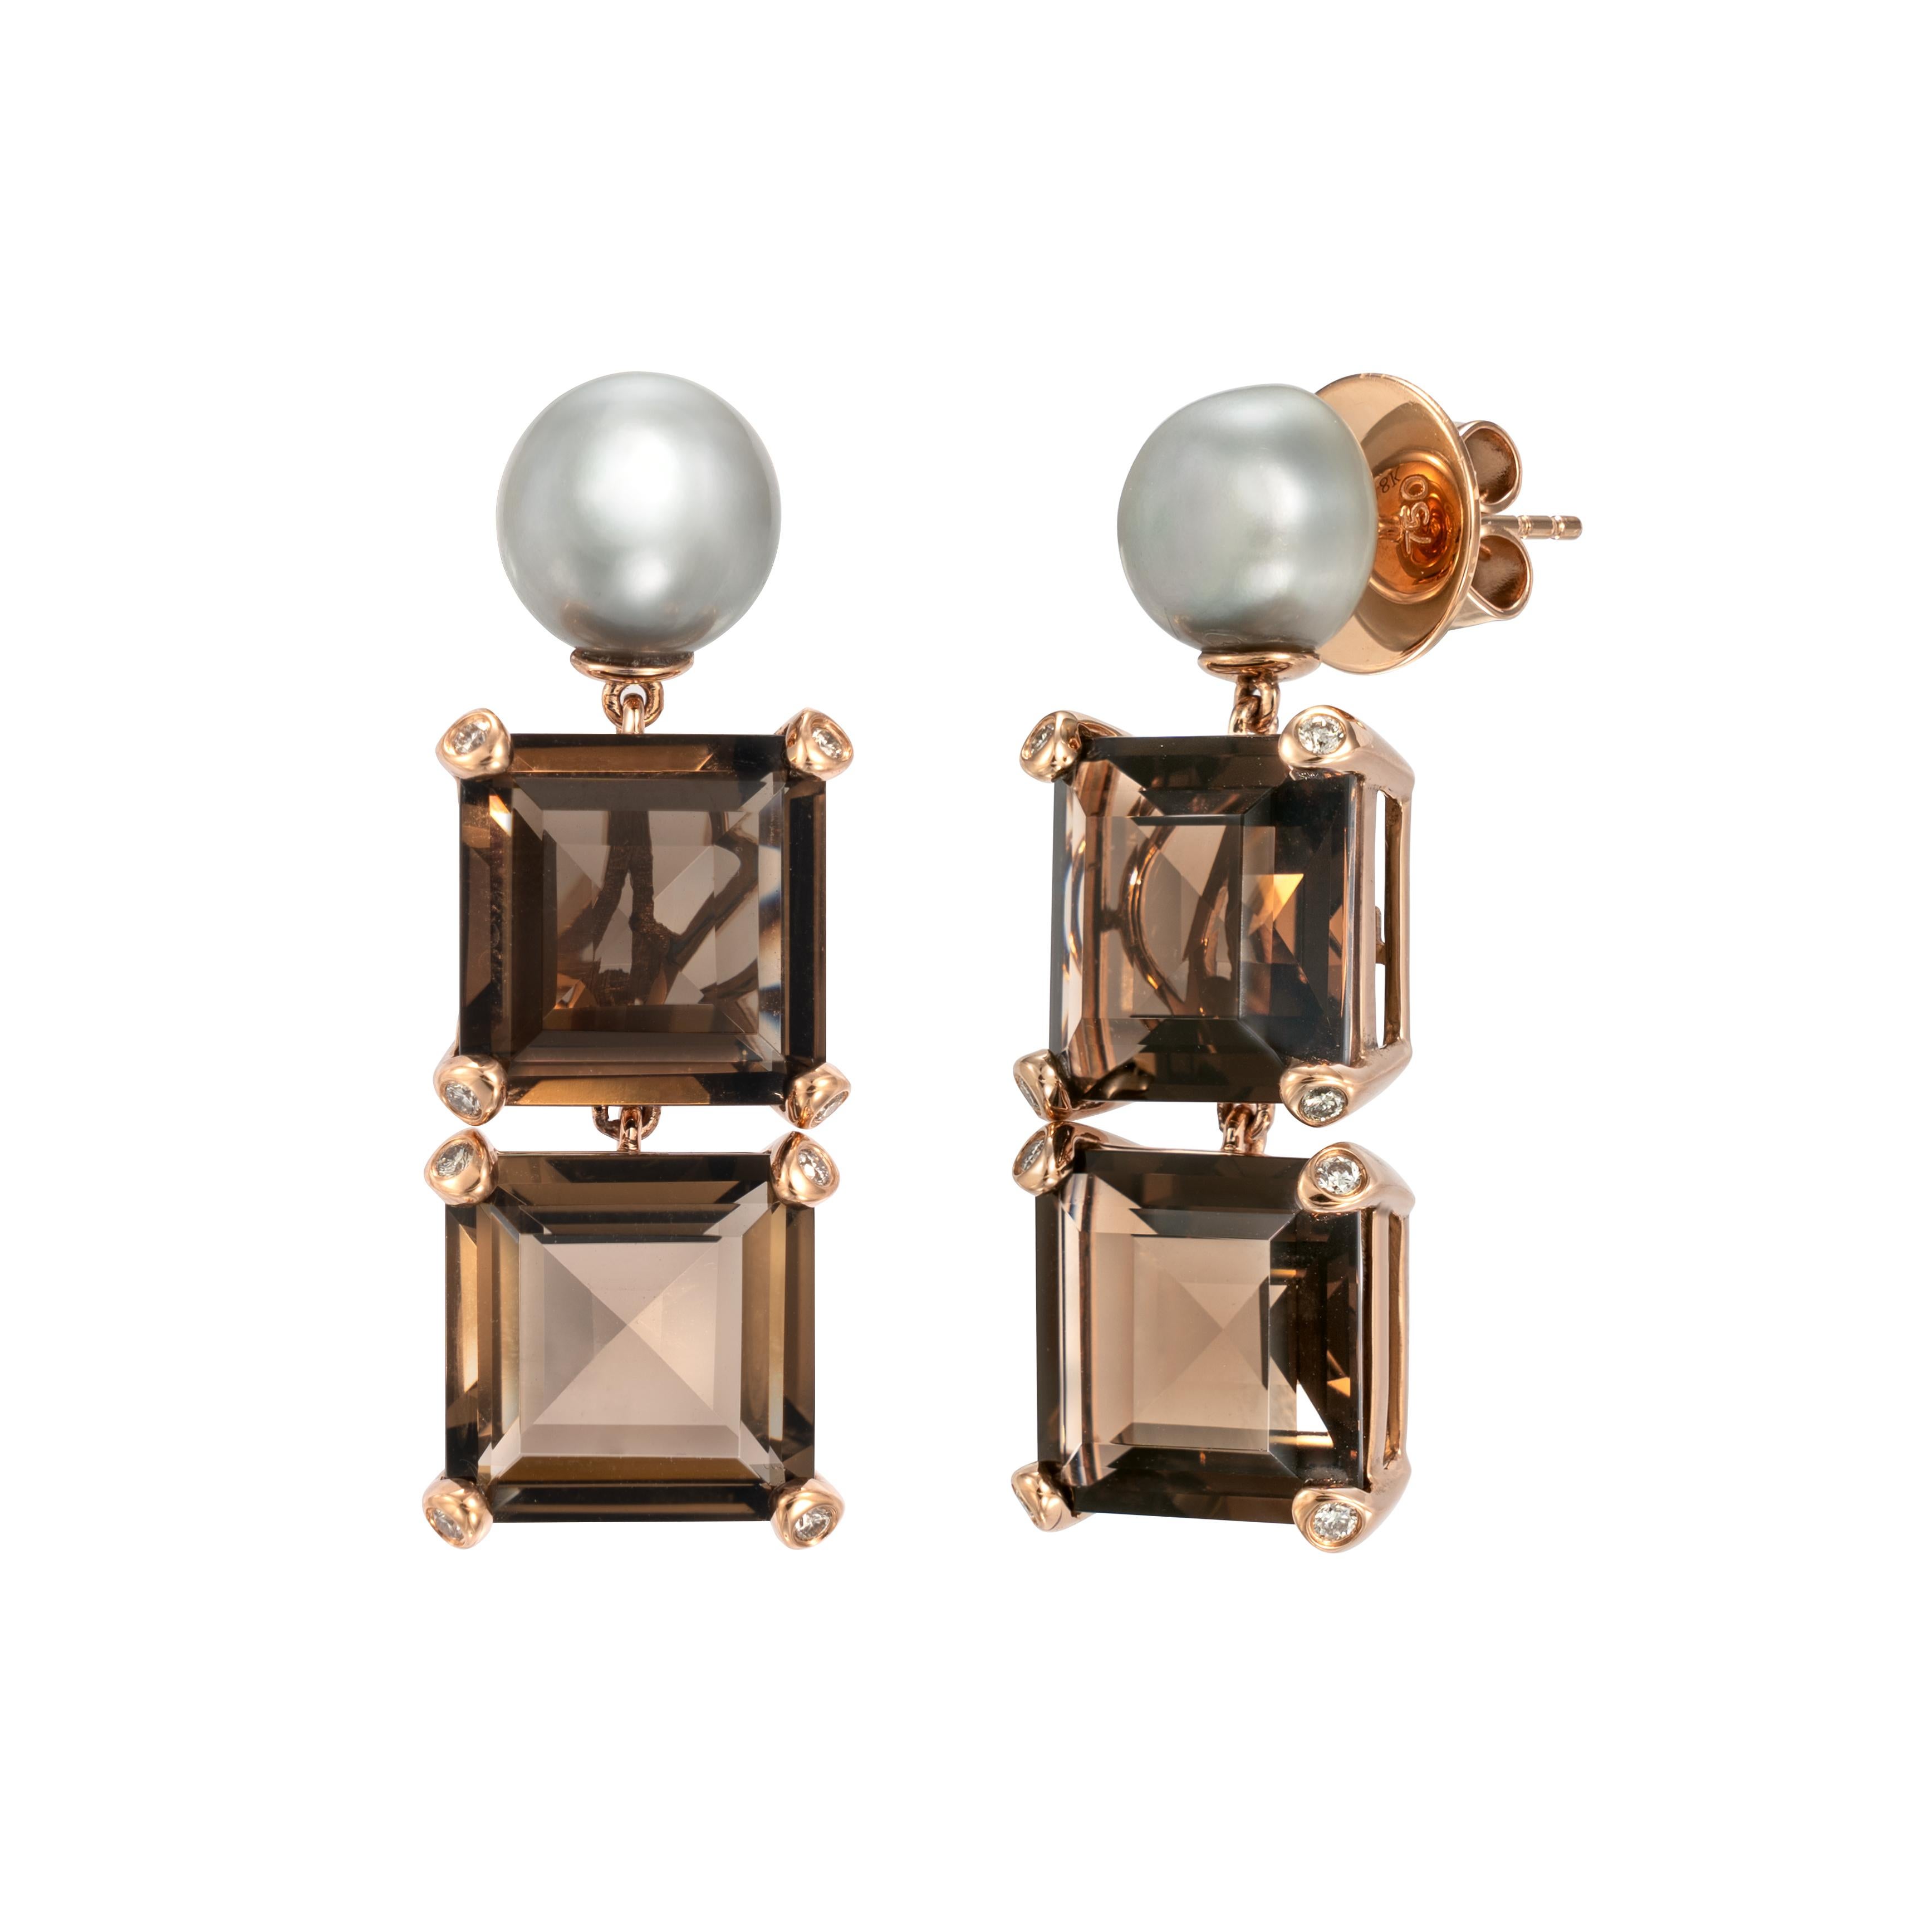 Light and easy to wear these earrings showcase smoky quartz accented with pearls and diamonds. These earrings are dainty yet have a great pop of color from the vibrant gems.

Smoky Quartz Earrings with Pearls & Diamond in 18 Karat Rose Gold

Smoky